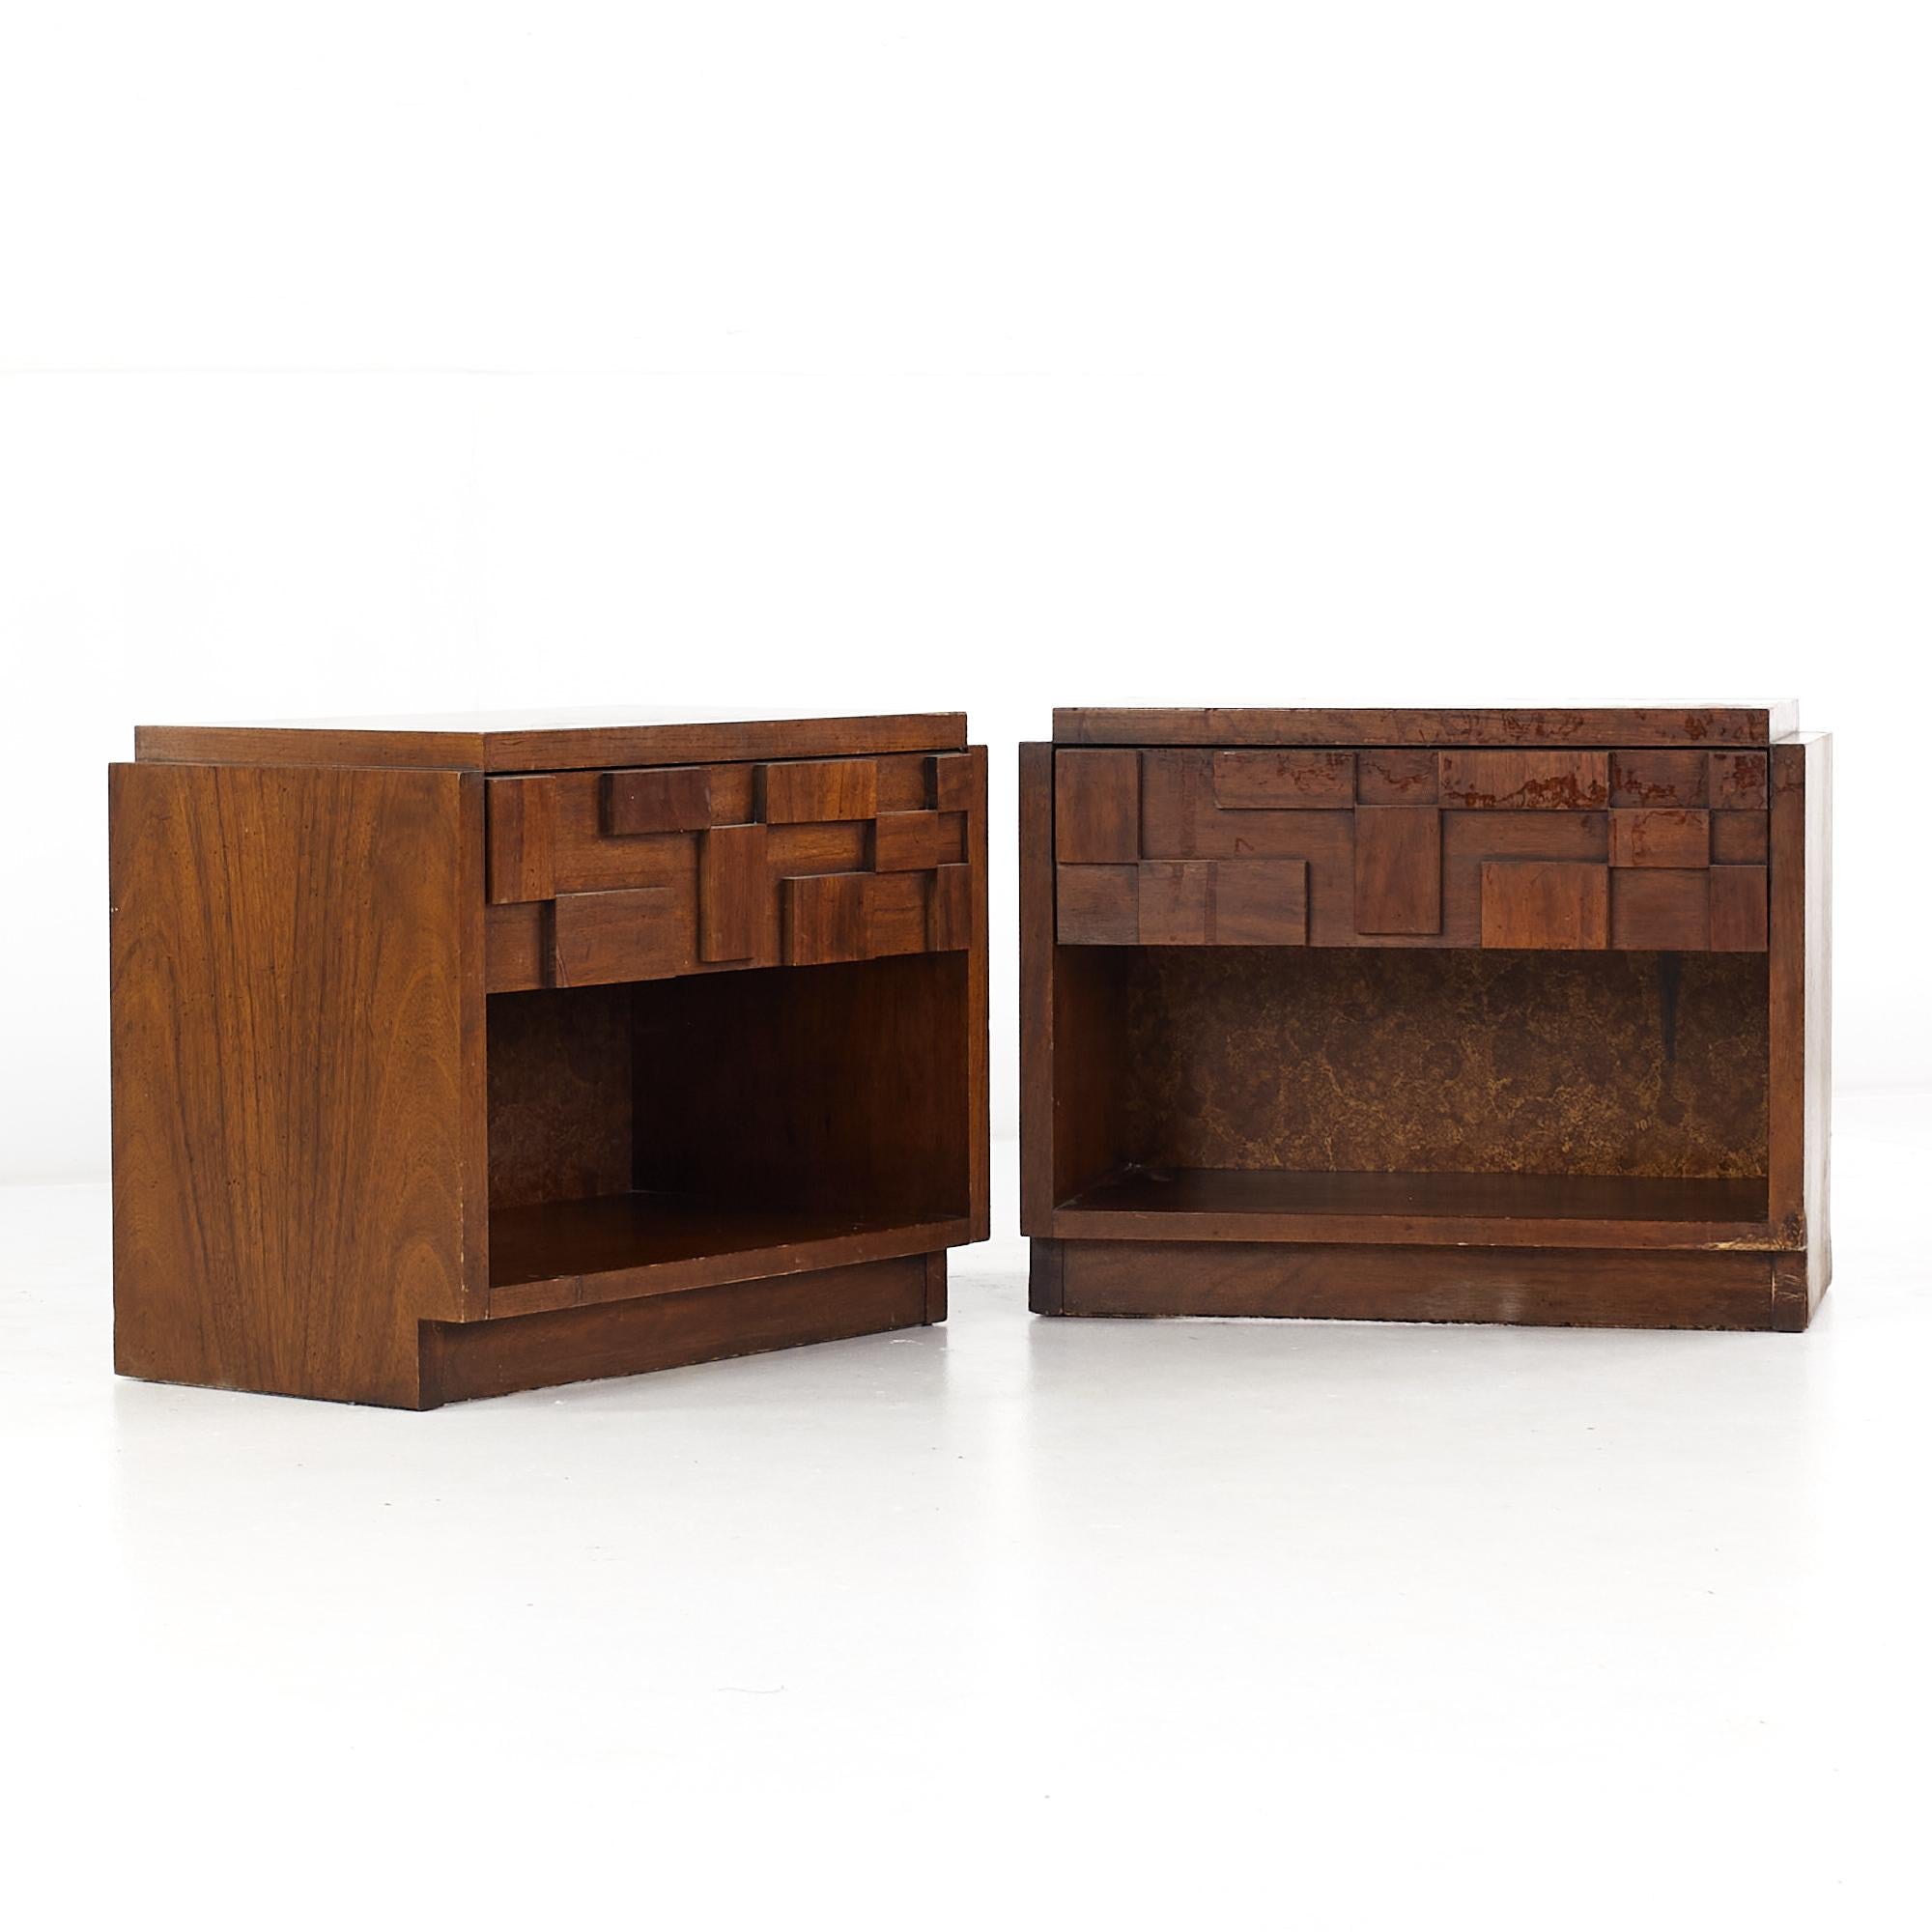 Lane Staccato Brutalist Mid Century walnut nightstands - pair

Each nightstand measures: 28 wide x 16 deep x 22.25 inches high

All pieces of furniture can be had in what we call restored vintage condition. That means the piece is restored upon